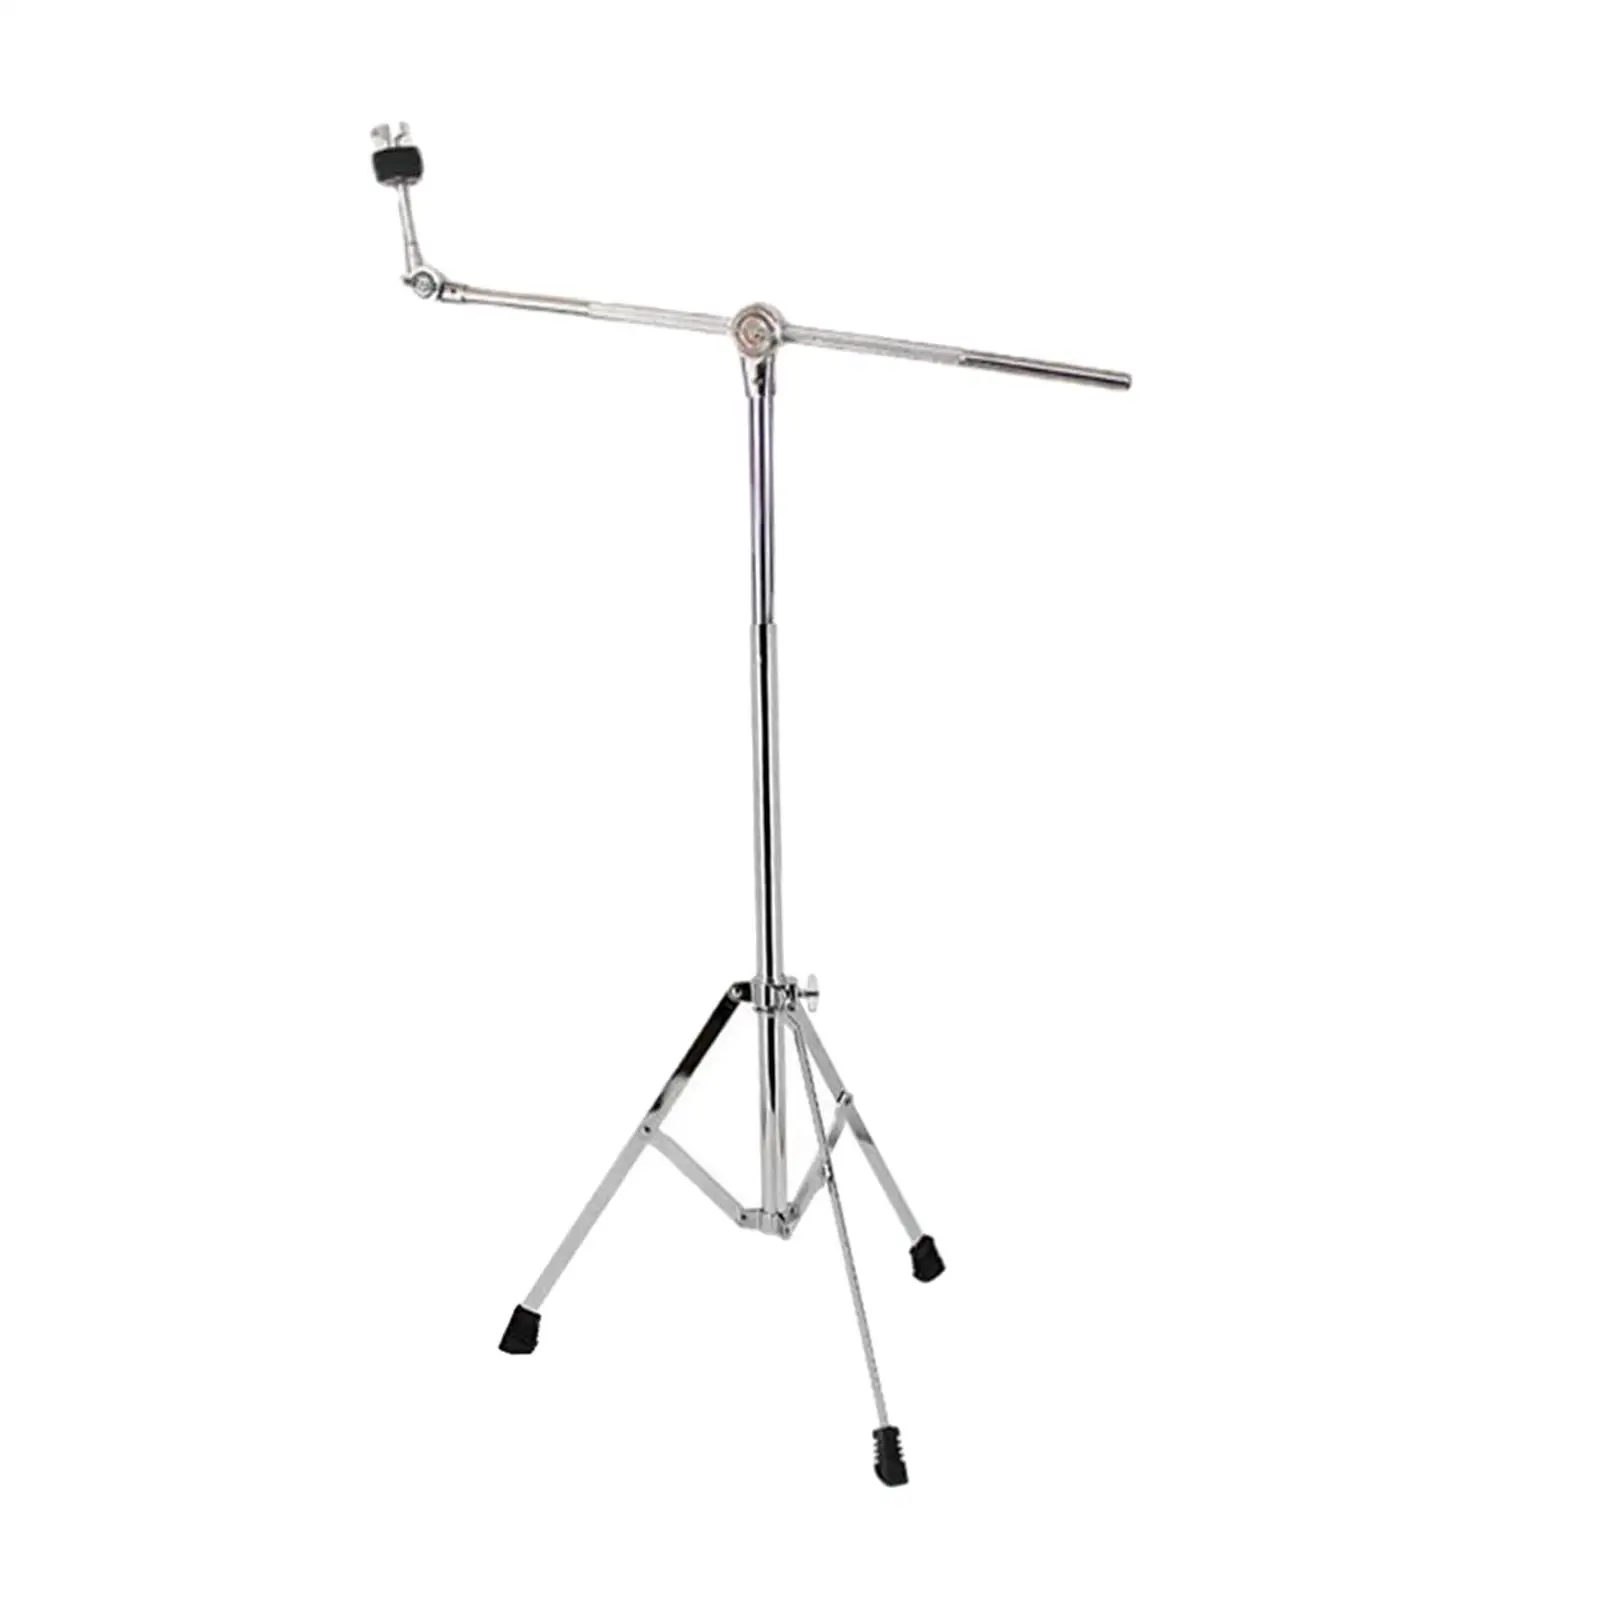 Percussion Floor Cymbal Stand Holder Adjustable Accessory Portable Heavy Duty Metal Tube Professional Universal Easily Carry